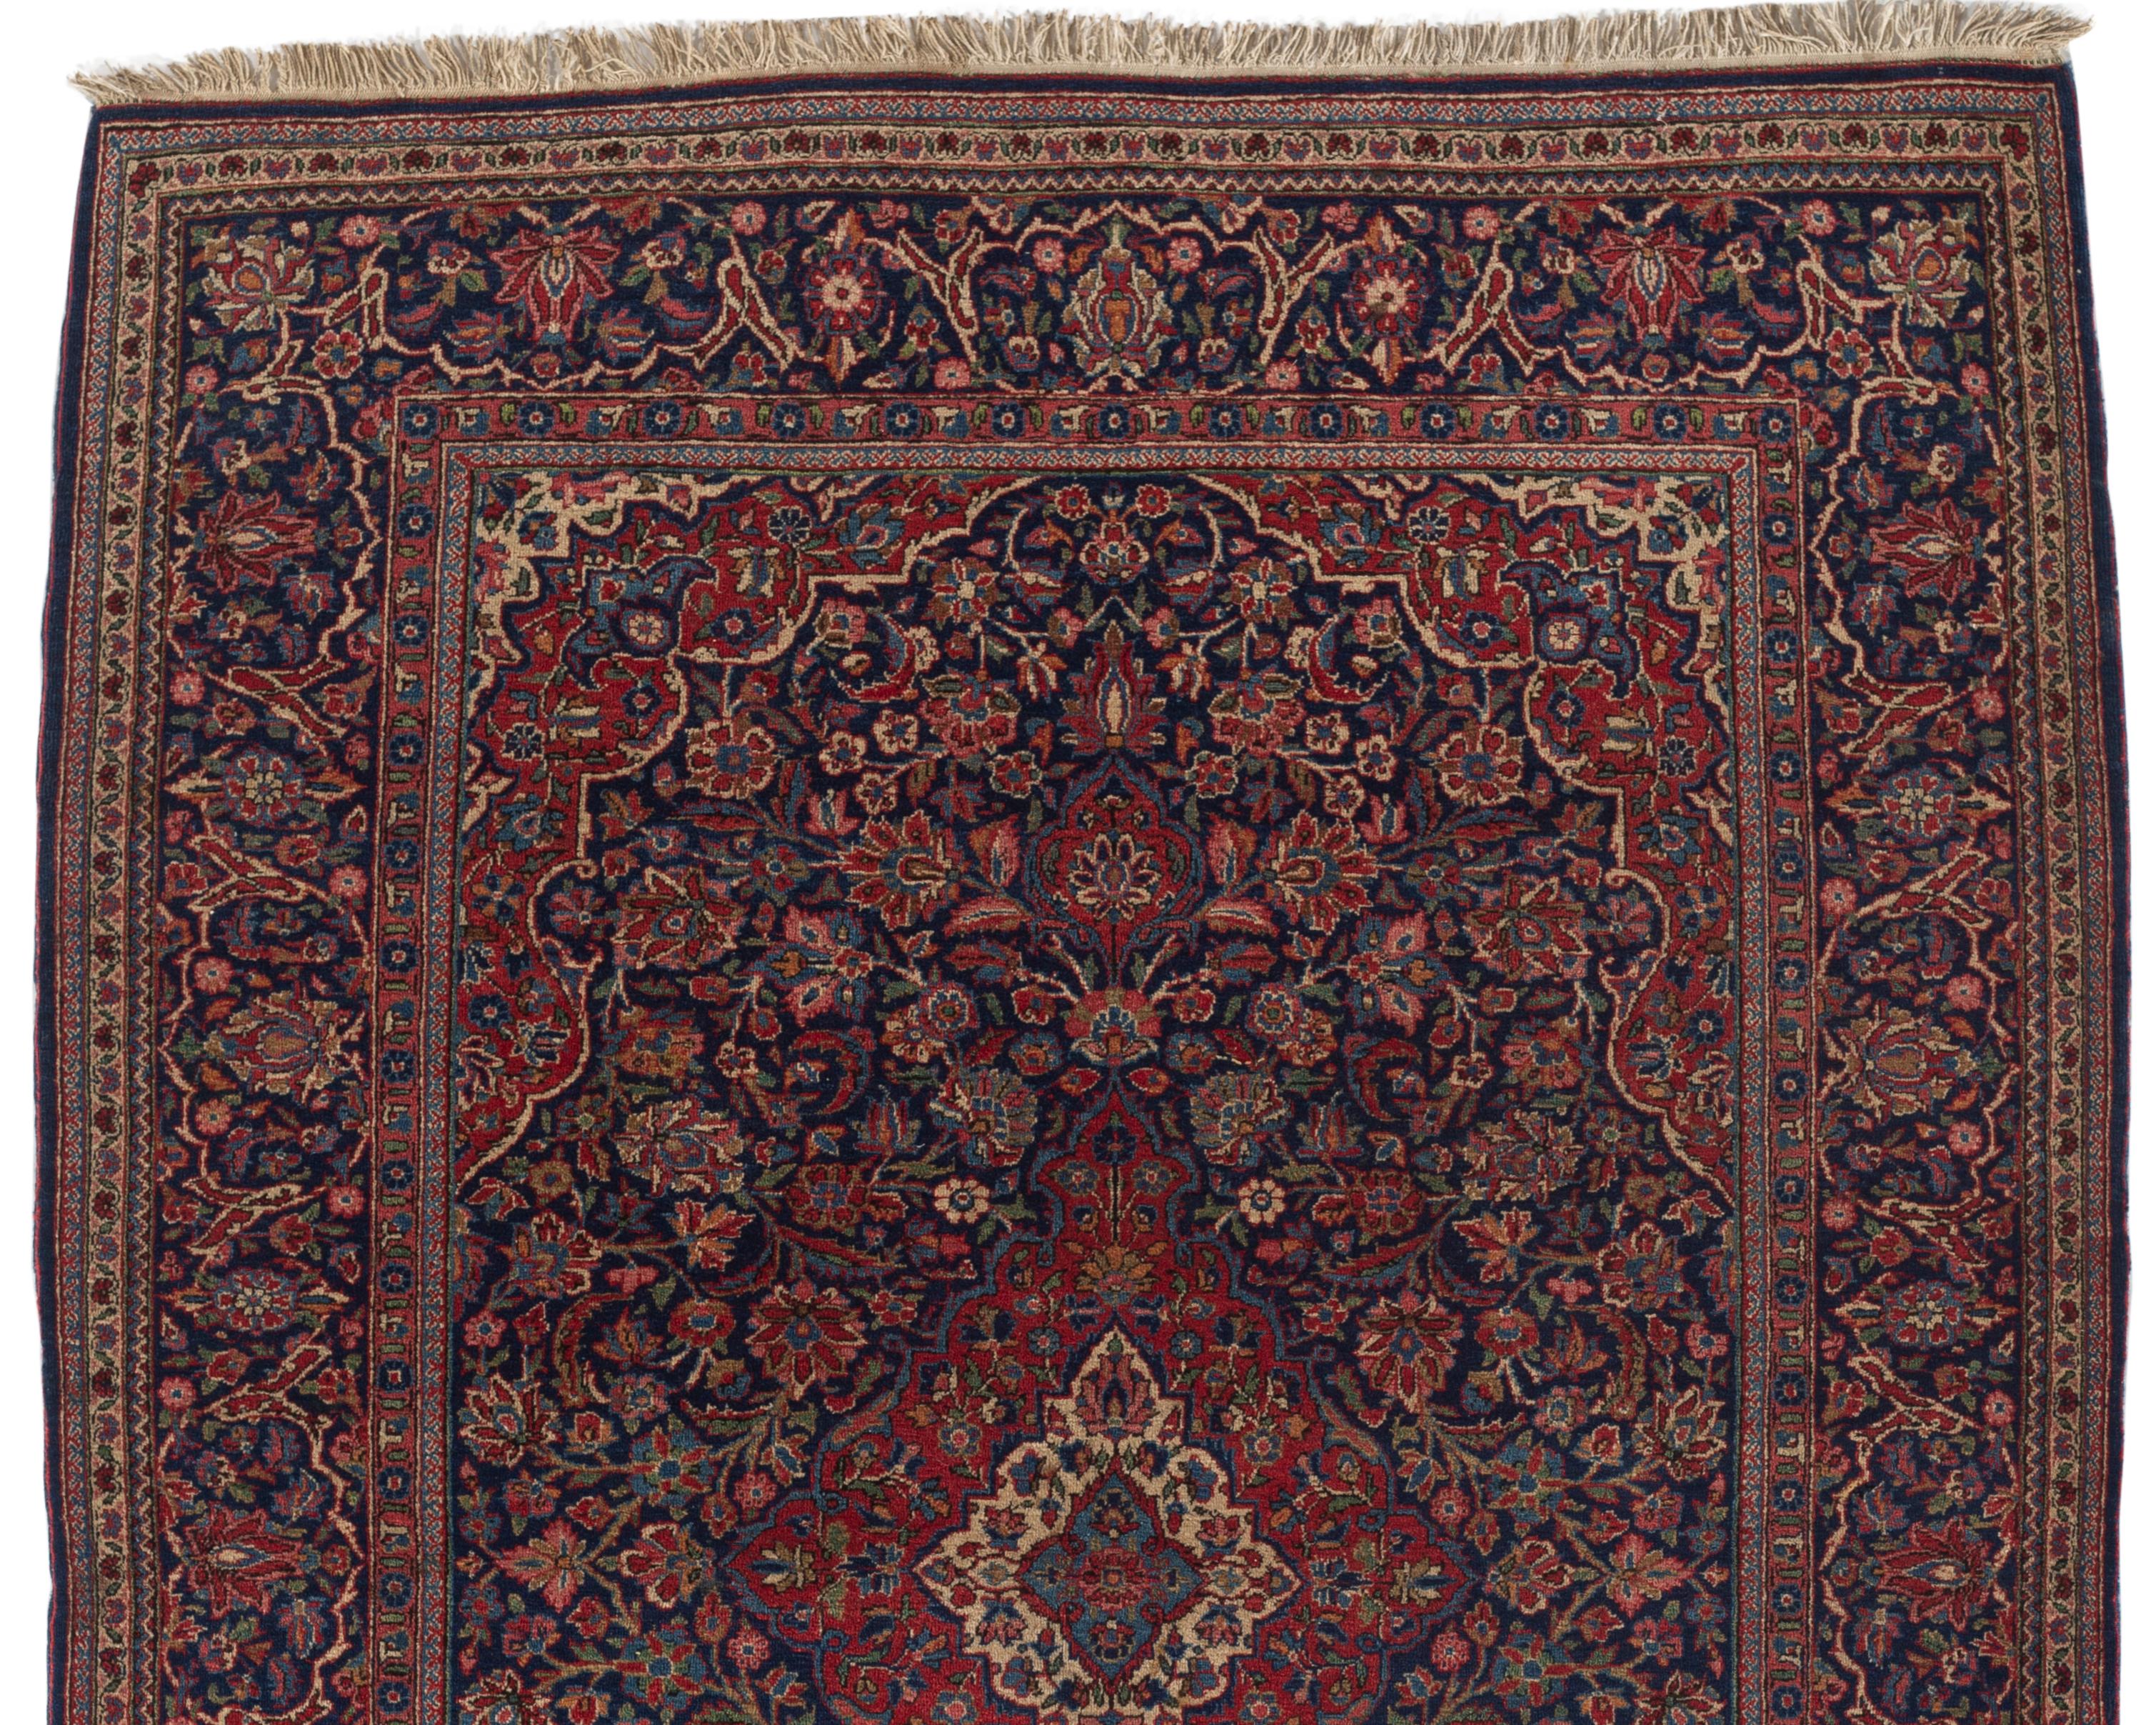 Vintage Persian Kashan, circa 1920. This Persian handwoven Kashan rug has a glorious central deep blue field filled with floral elements surrounding a central medallion. The main border compliments this picture to perfection. Size: 4'3 x 6'9.